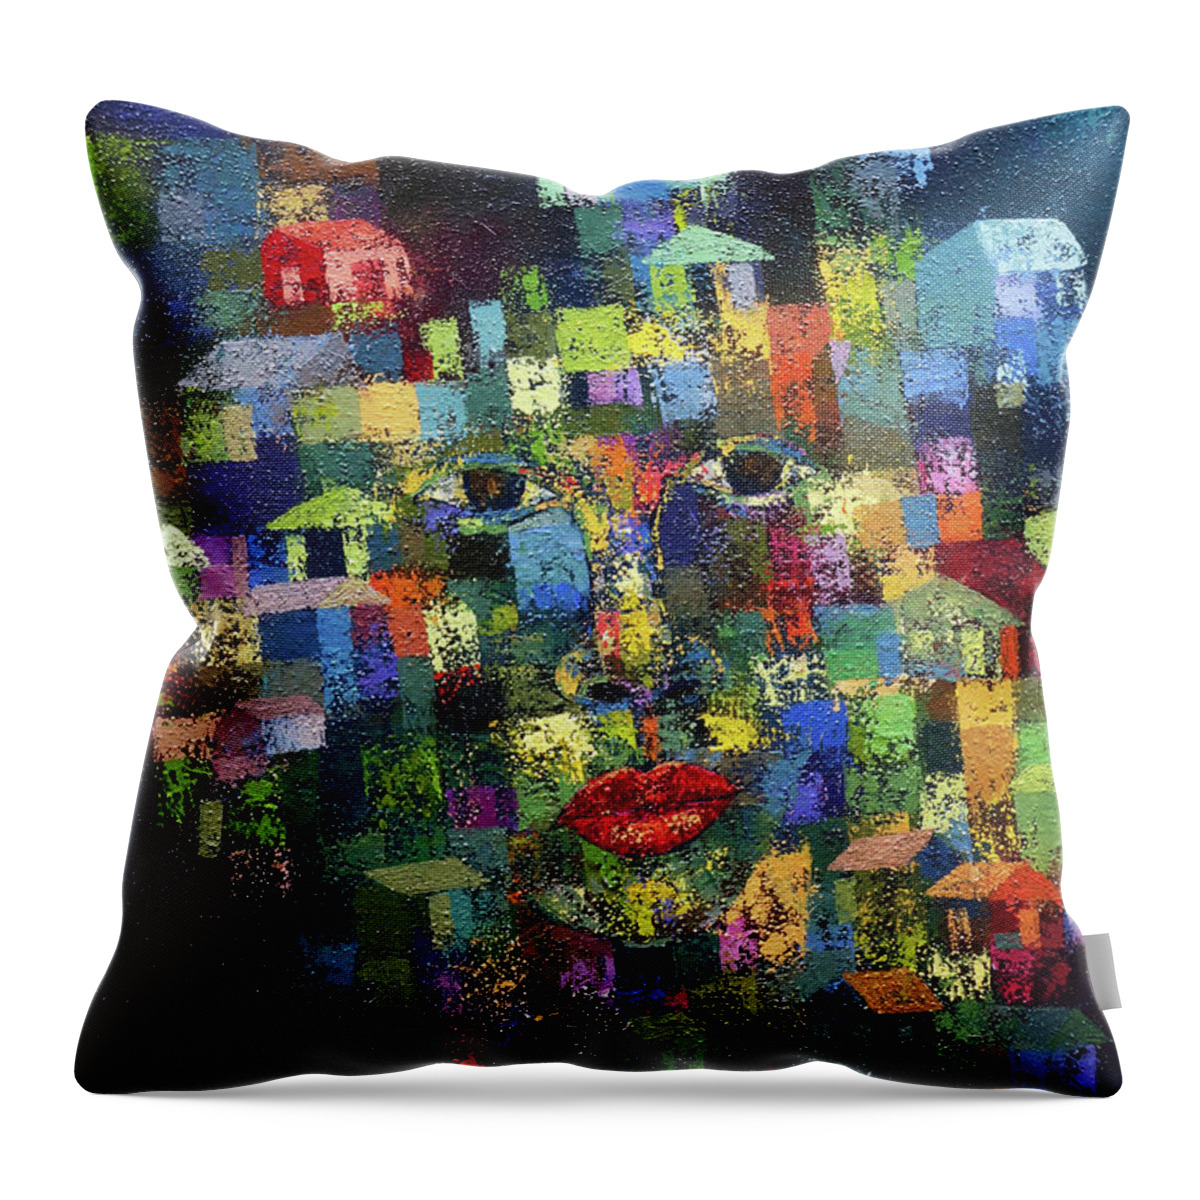 Ronex Throw Pillow featuring the painting Greener Where You Are by Ronex Ahimbisibwe